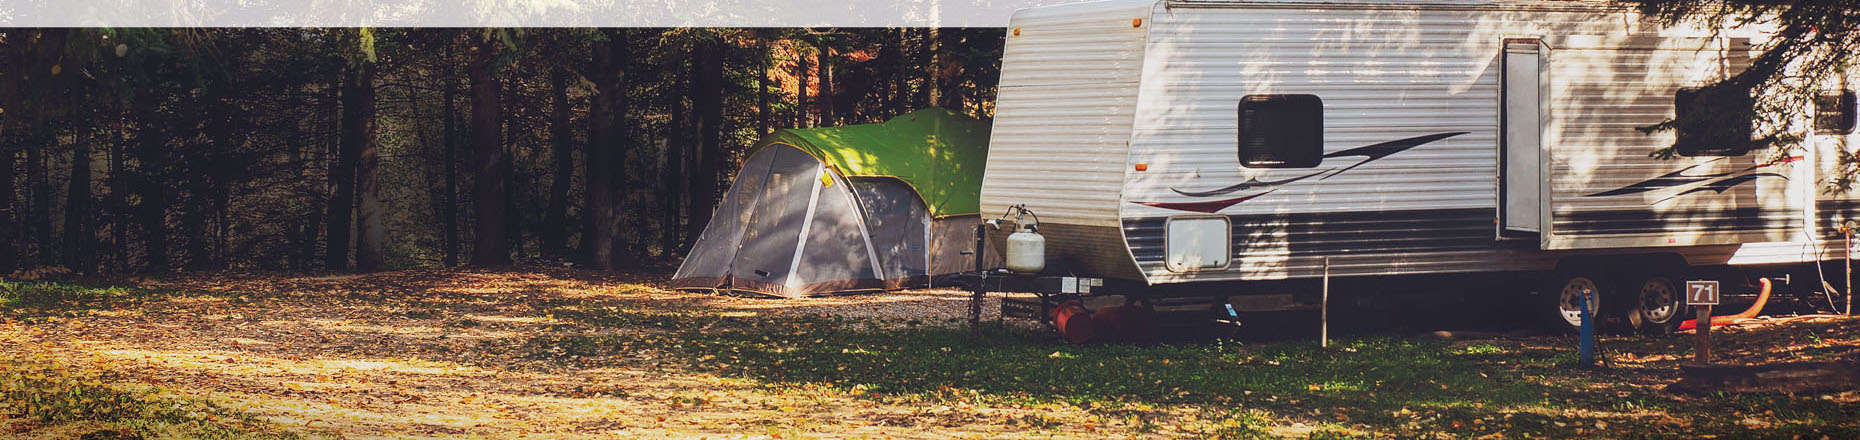 Tent and Camper